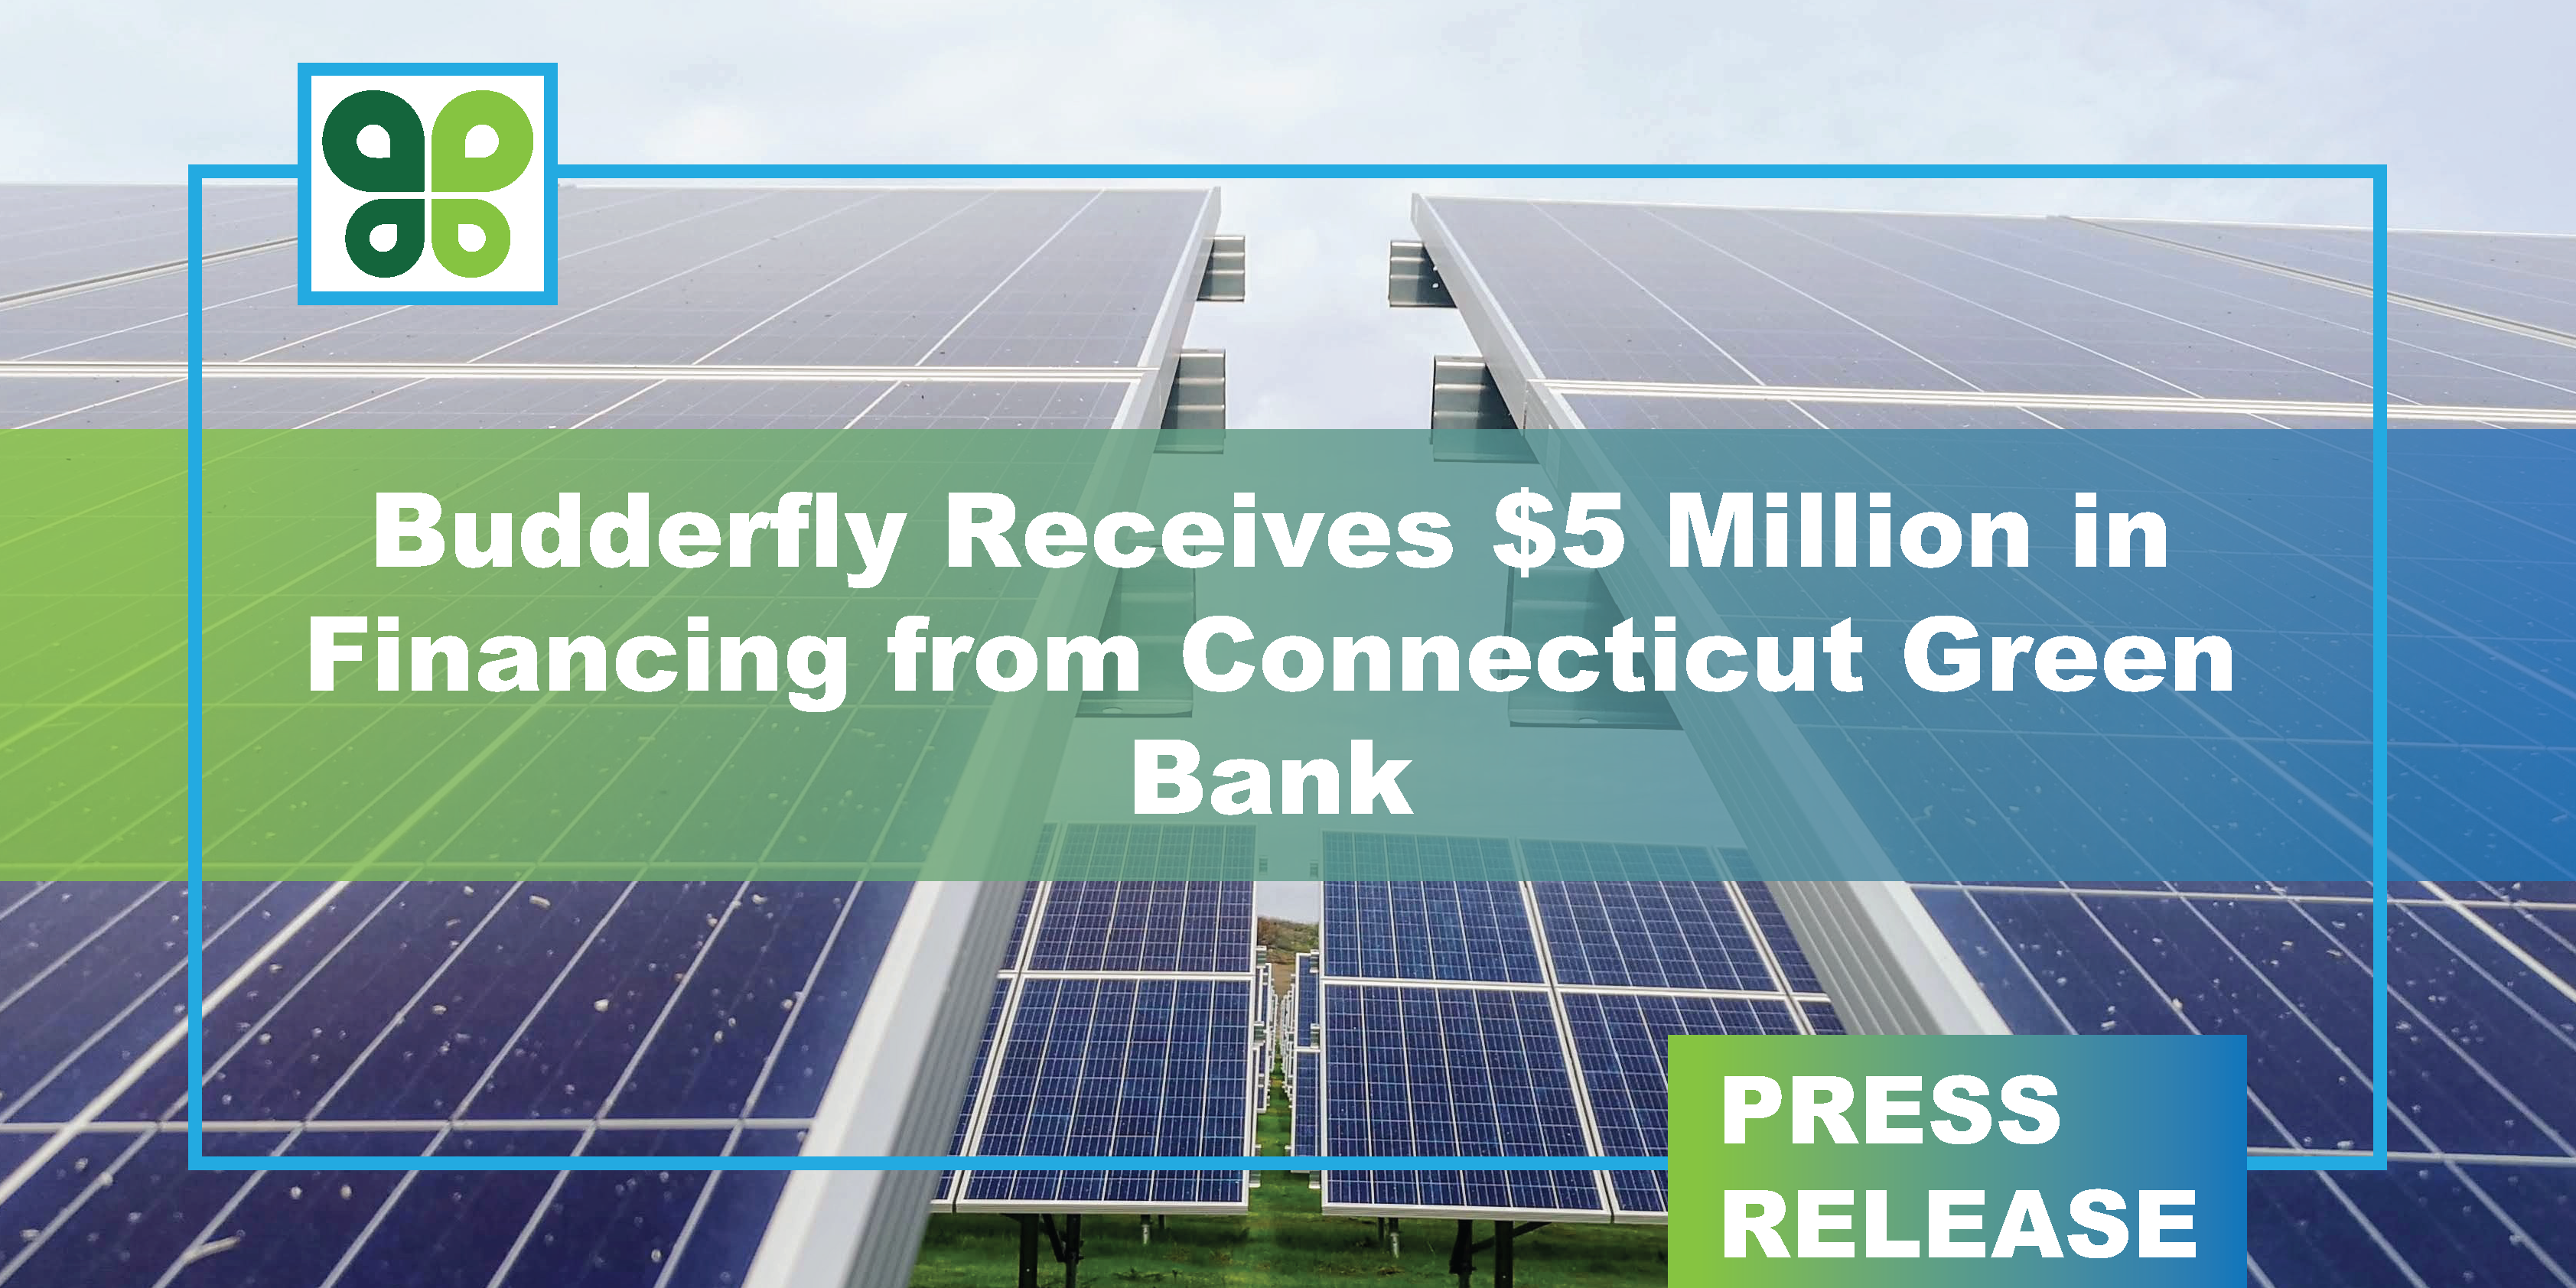 Budderfly Receives $5 Million in Financing from Connecticut Green Bank